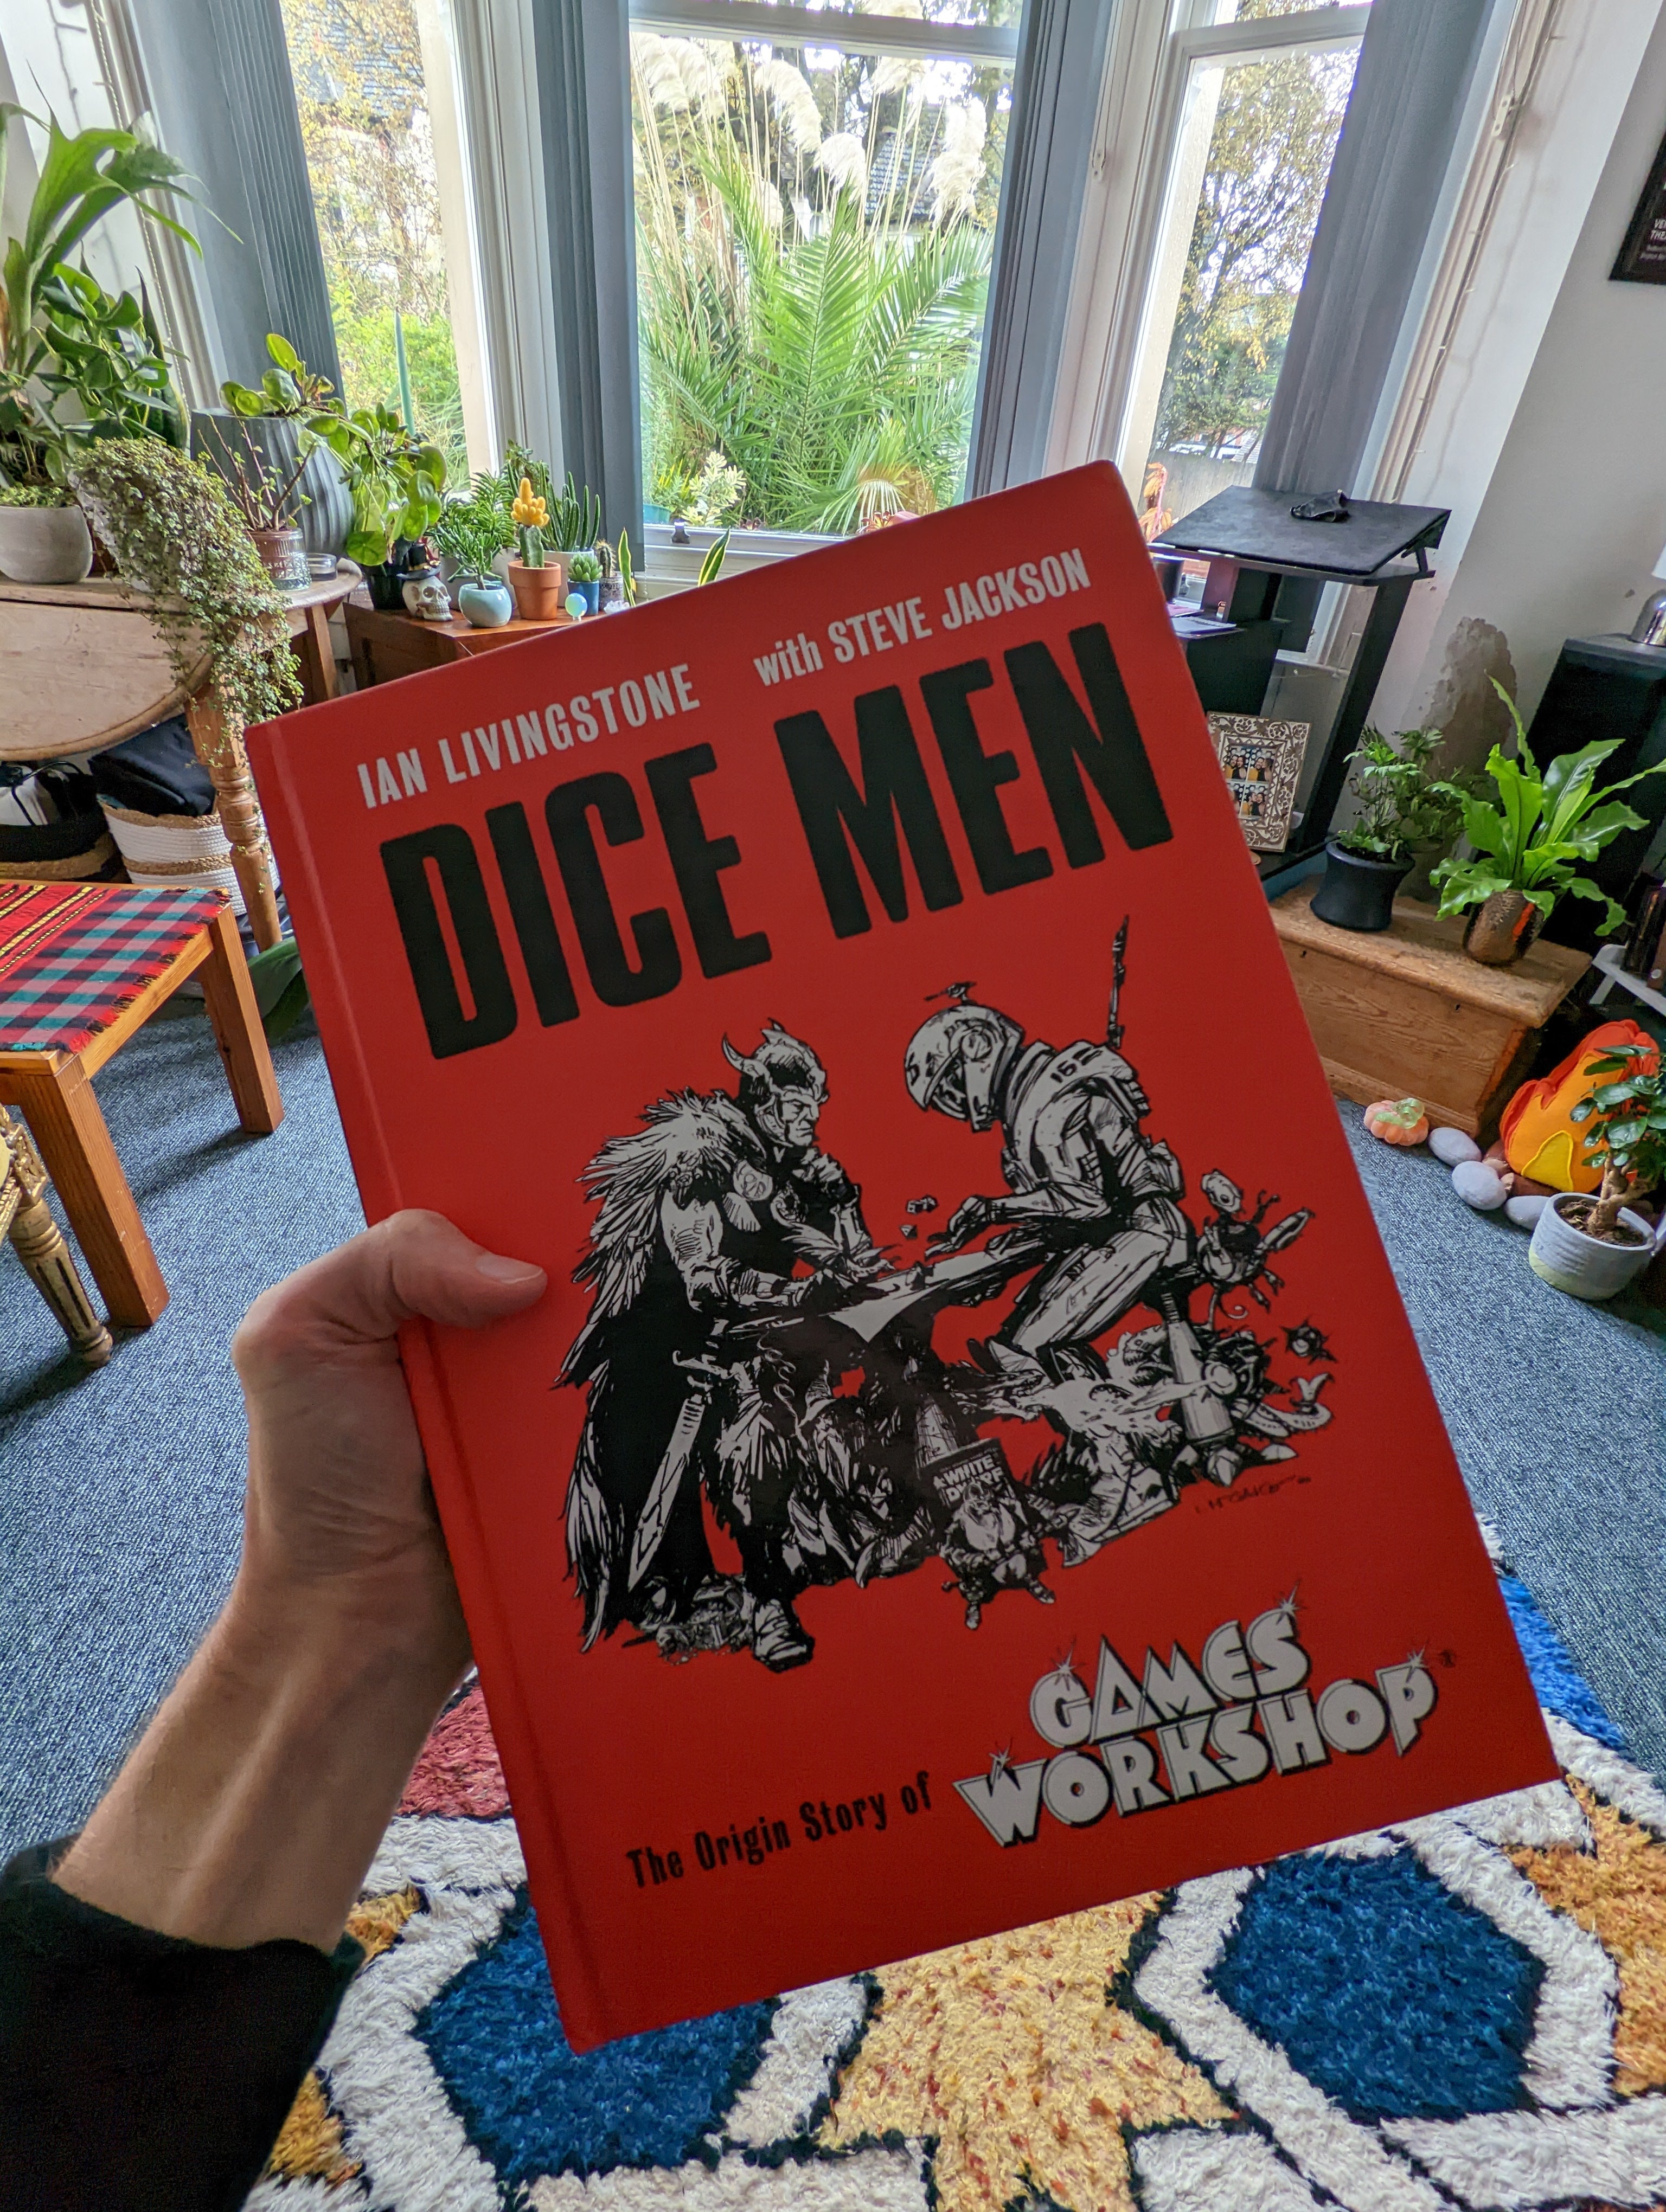 Bertie's hand, and adjoining arm, holding up the Dice Men Games Workshop history book. It's bright red with two characters - one from fantasy, one from sci-fi - playing a game of dice together. Bertie's  flat can be pictured in the background. It has some plants in it.